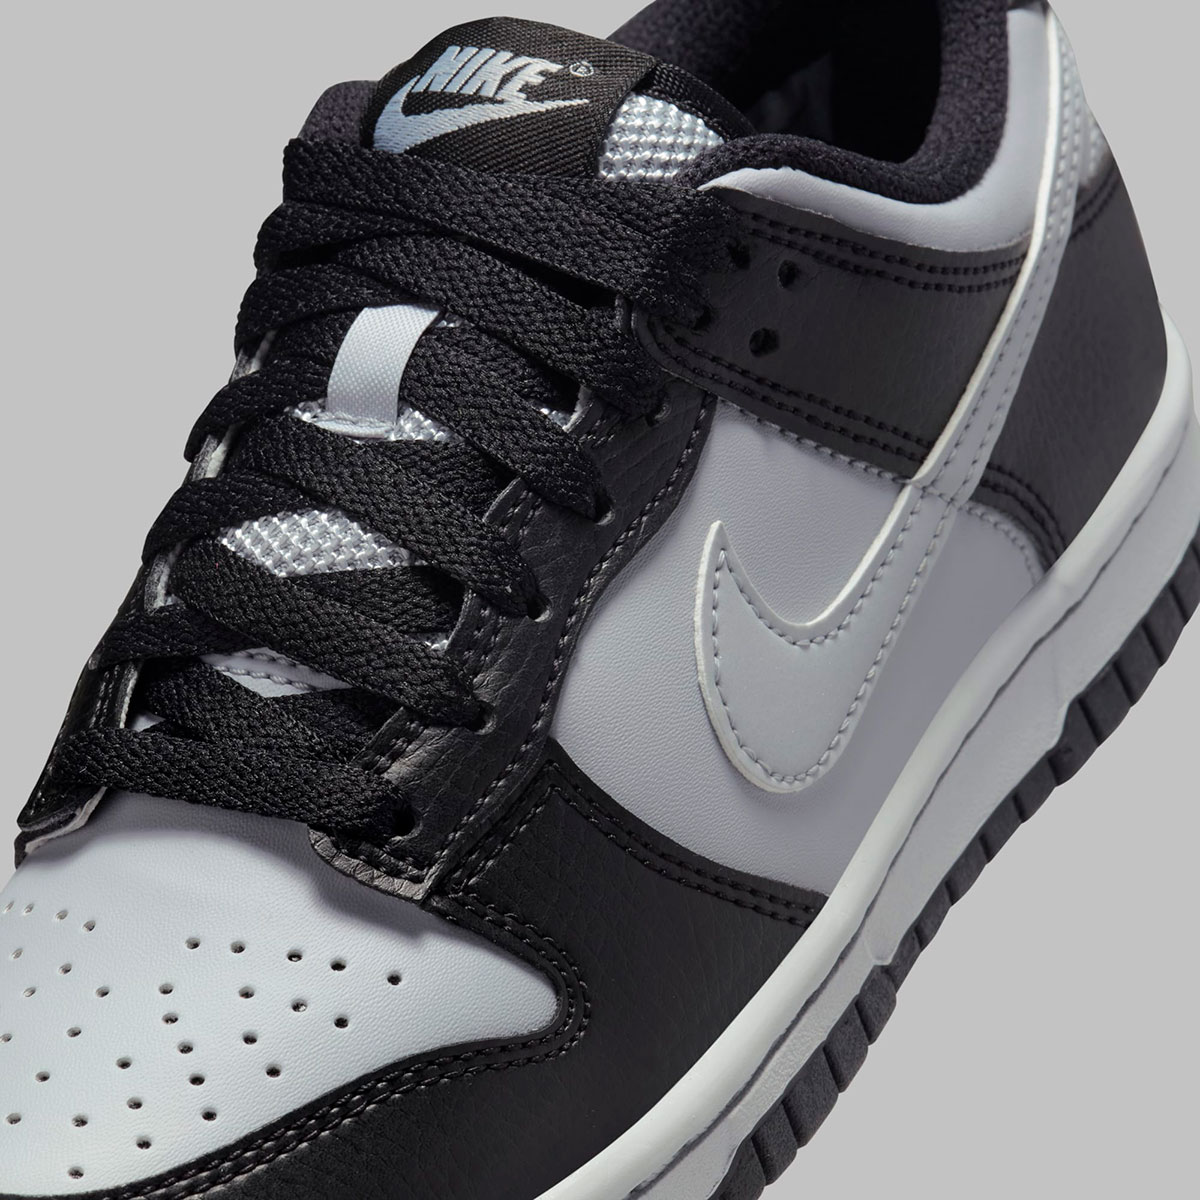 Nike Dunk Low Gs Black Reflective Pack Release Date 7